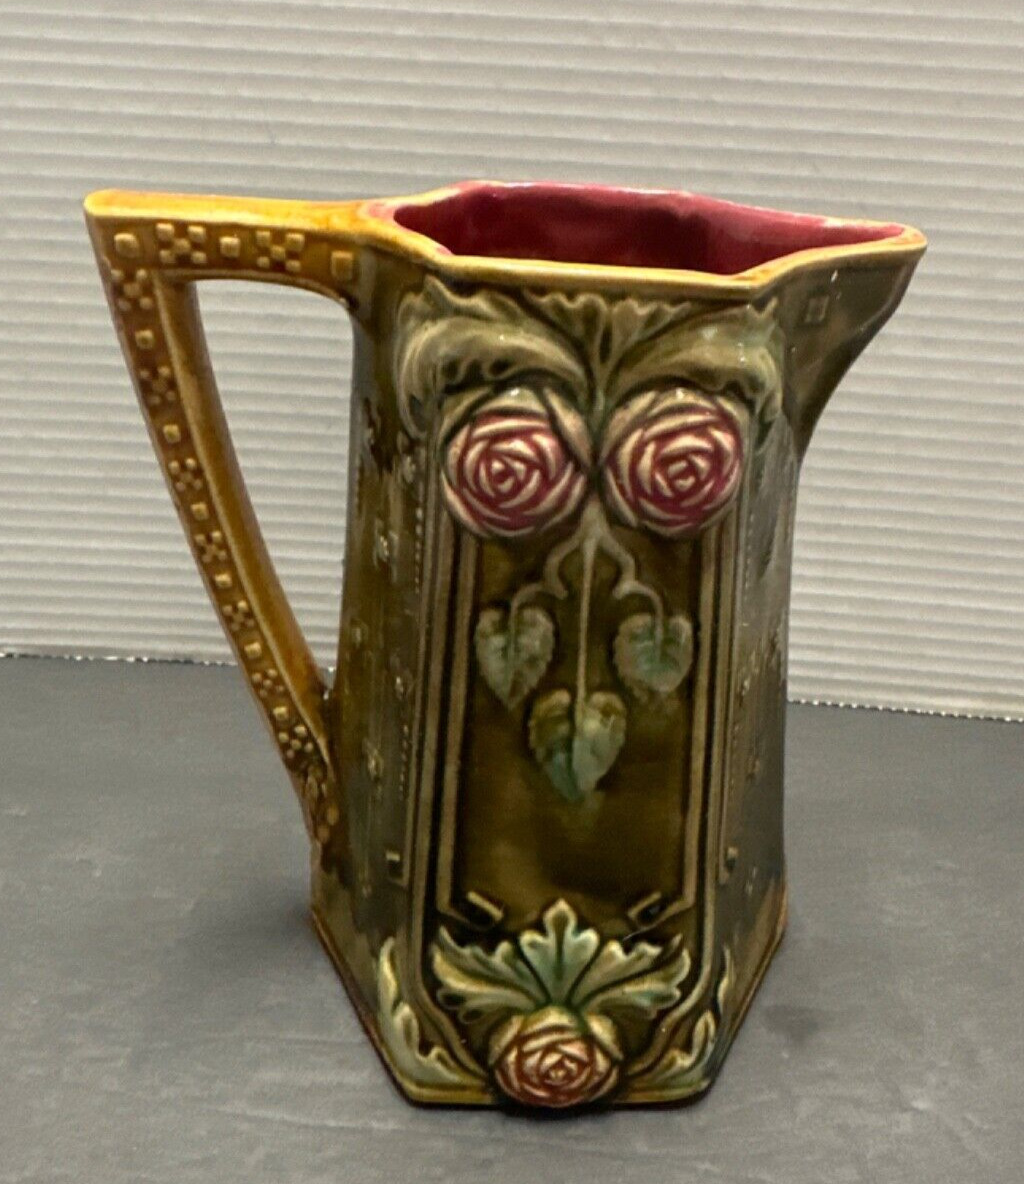 Antique 1800’s French Art Nouveau Majolica Pitcher By Frie Onnaing 1870 - 1900